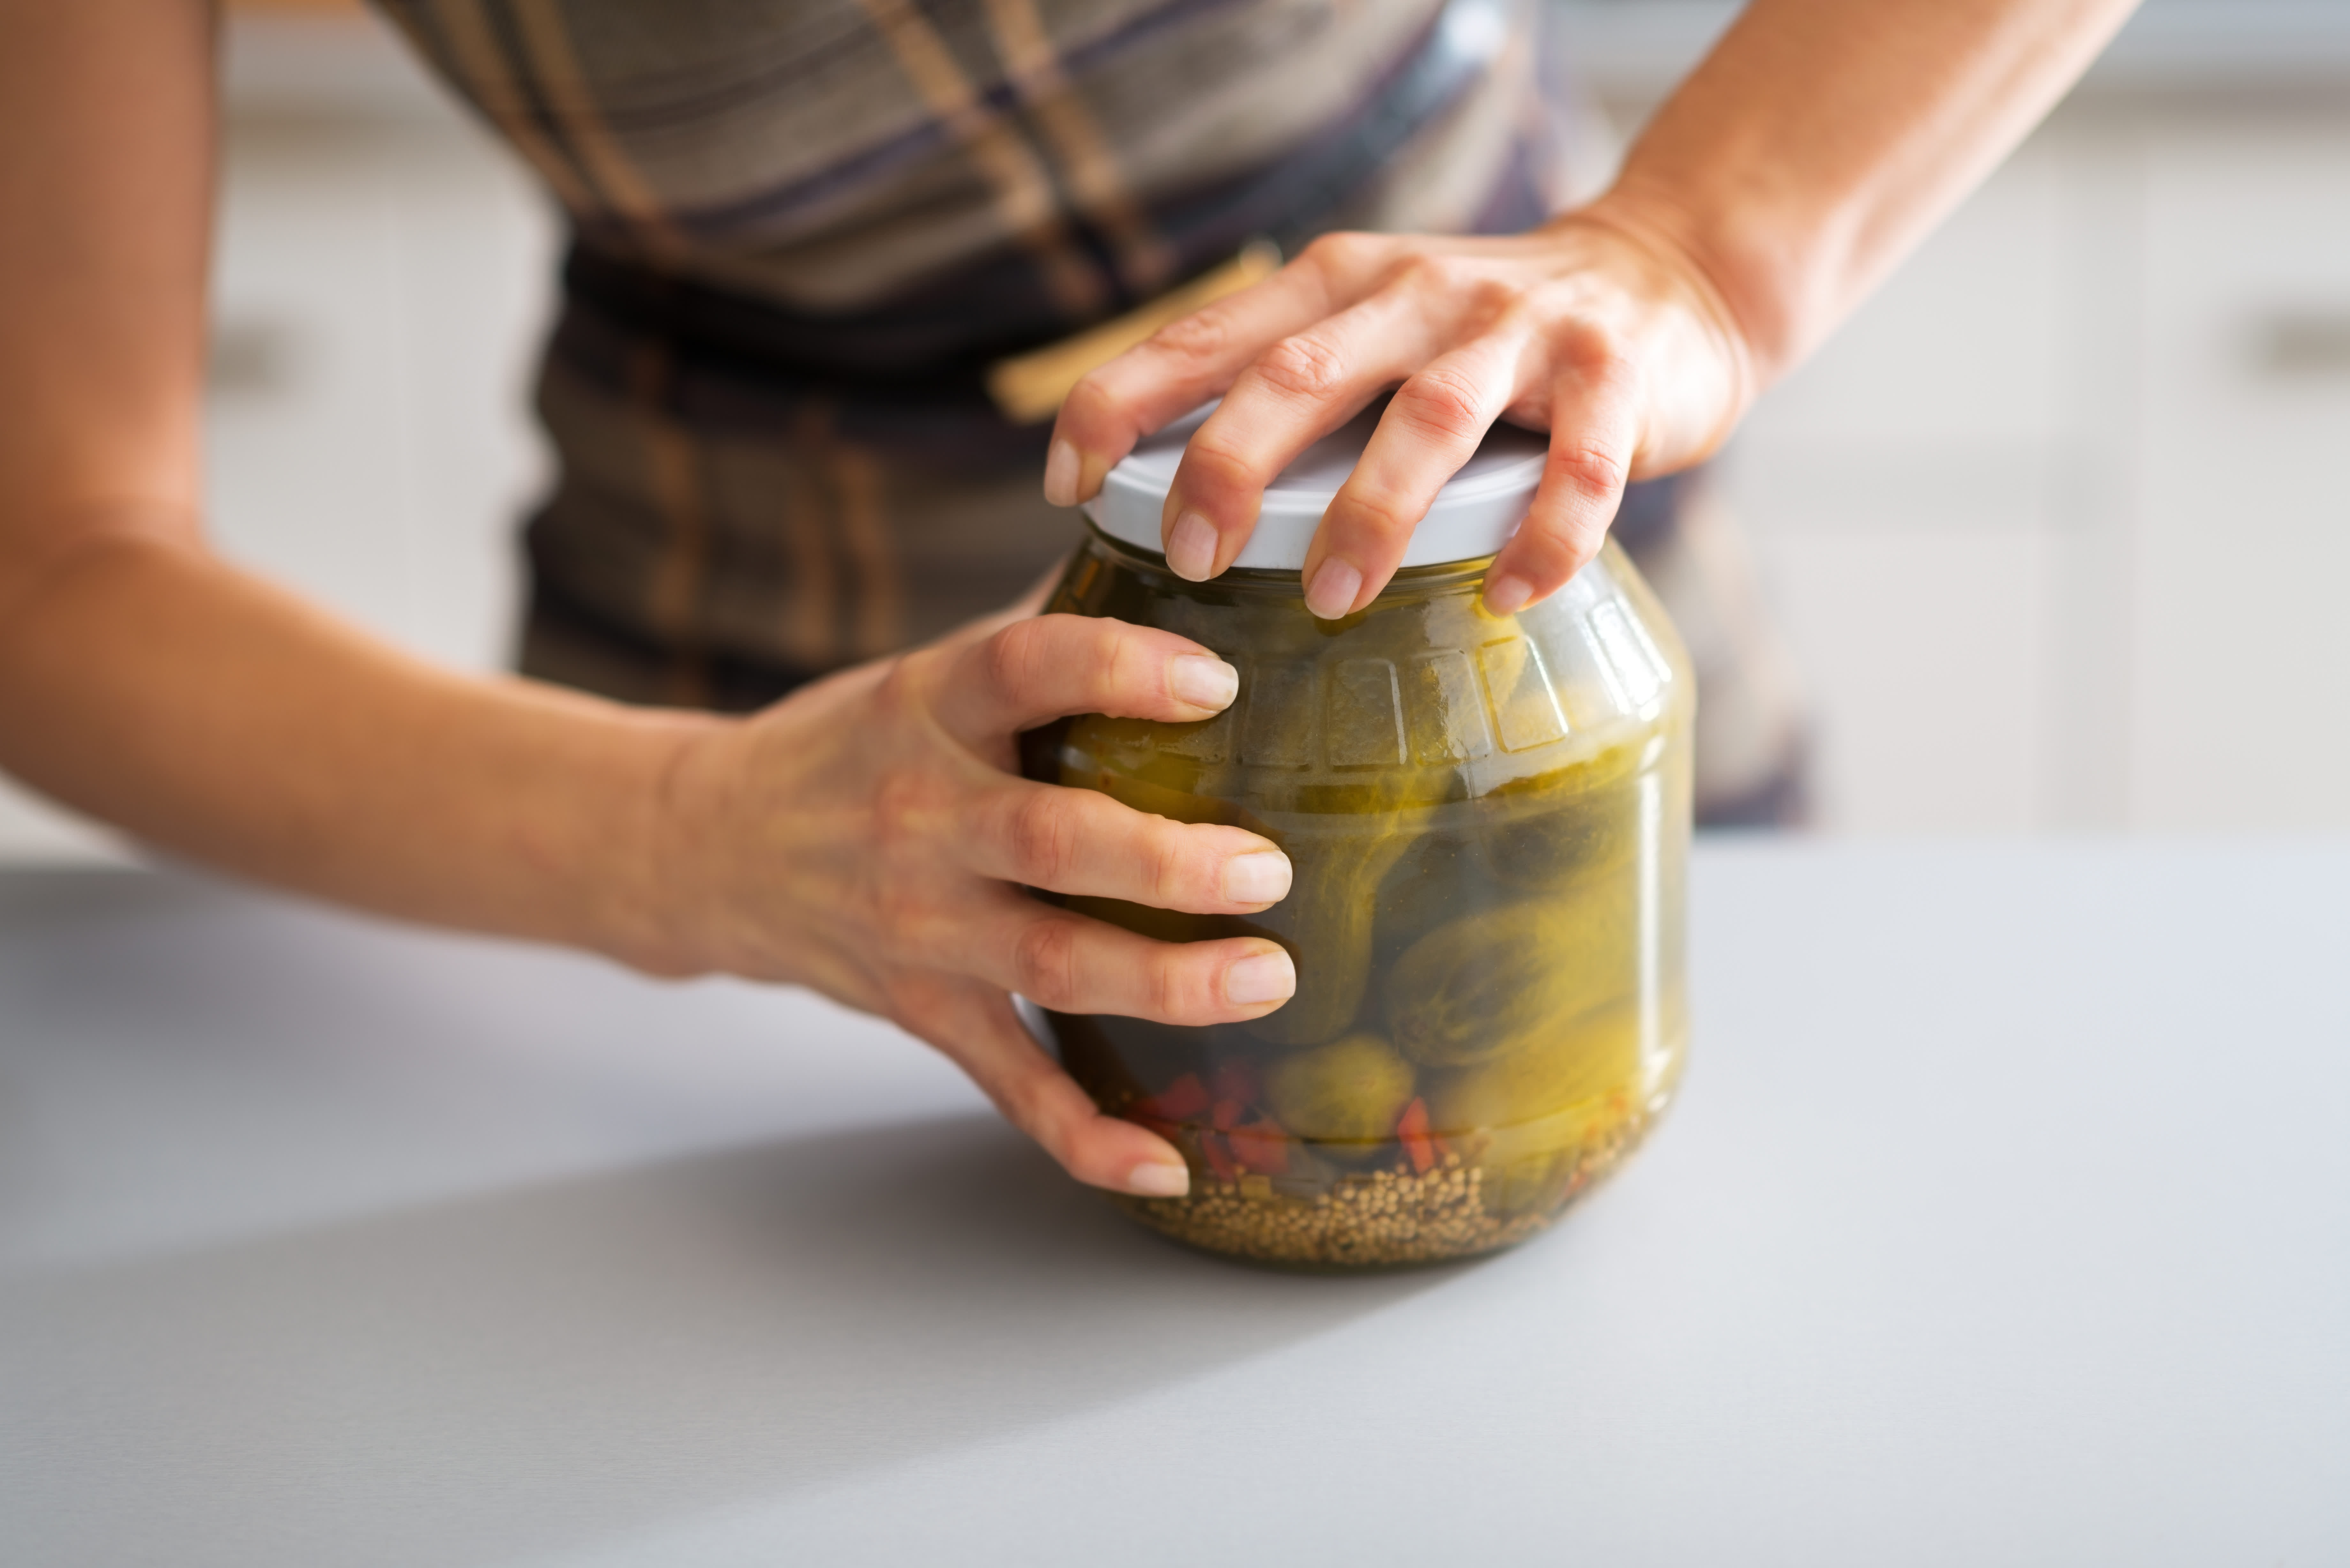 How to Tell if a Canning Jar is Sealed Properly - Jar Store - A